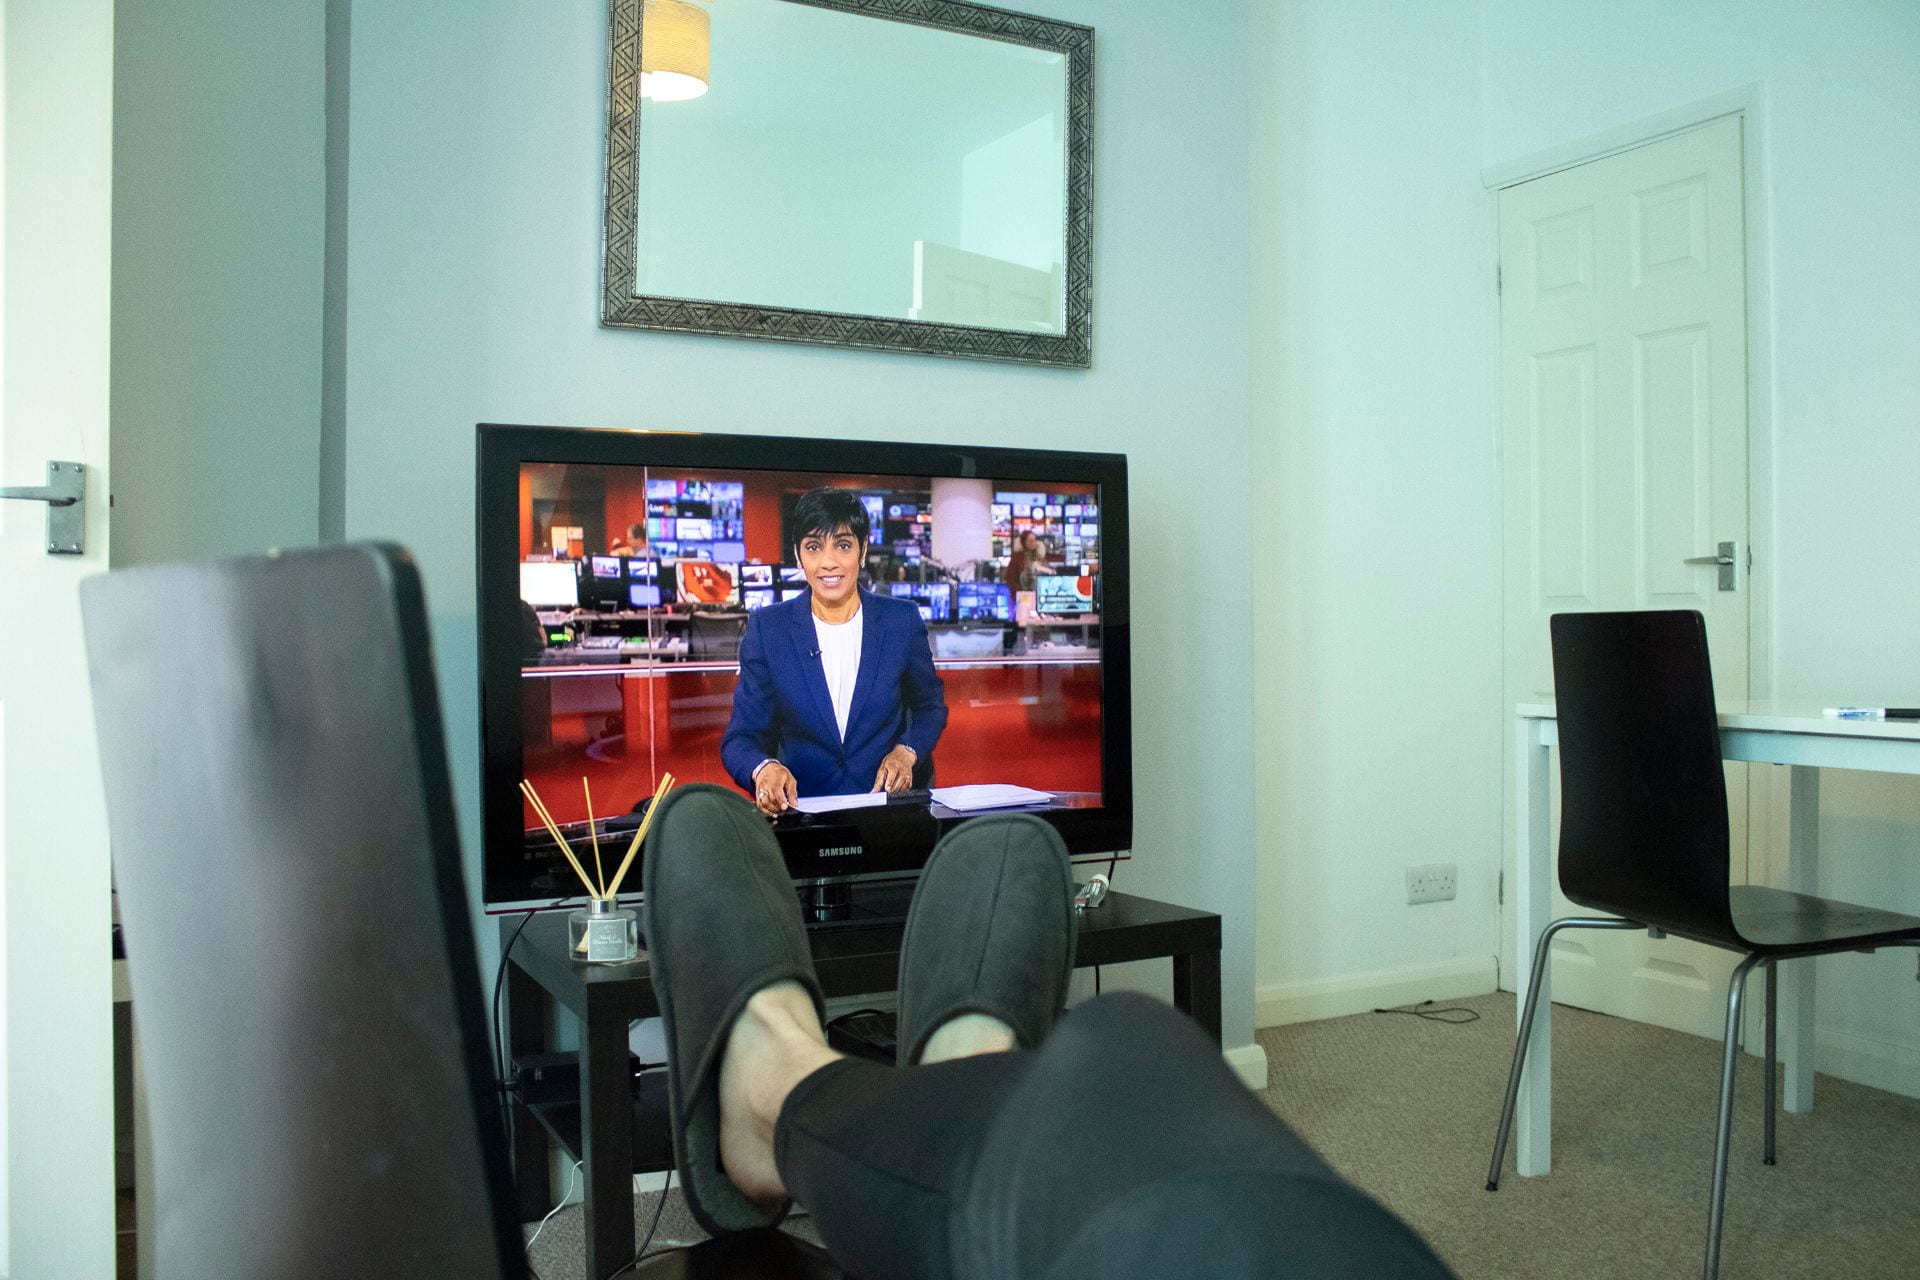 A man with his feet up whilst watching BBC news.